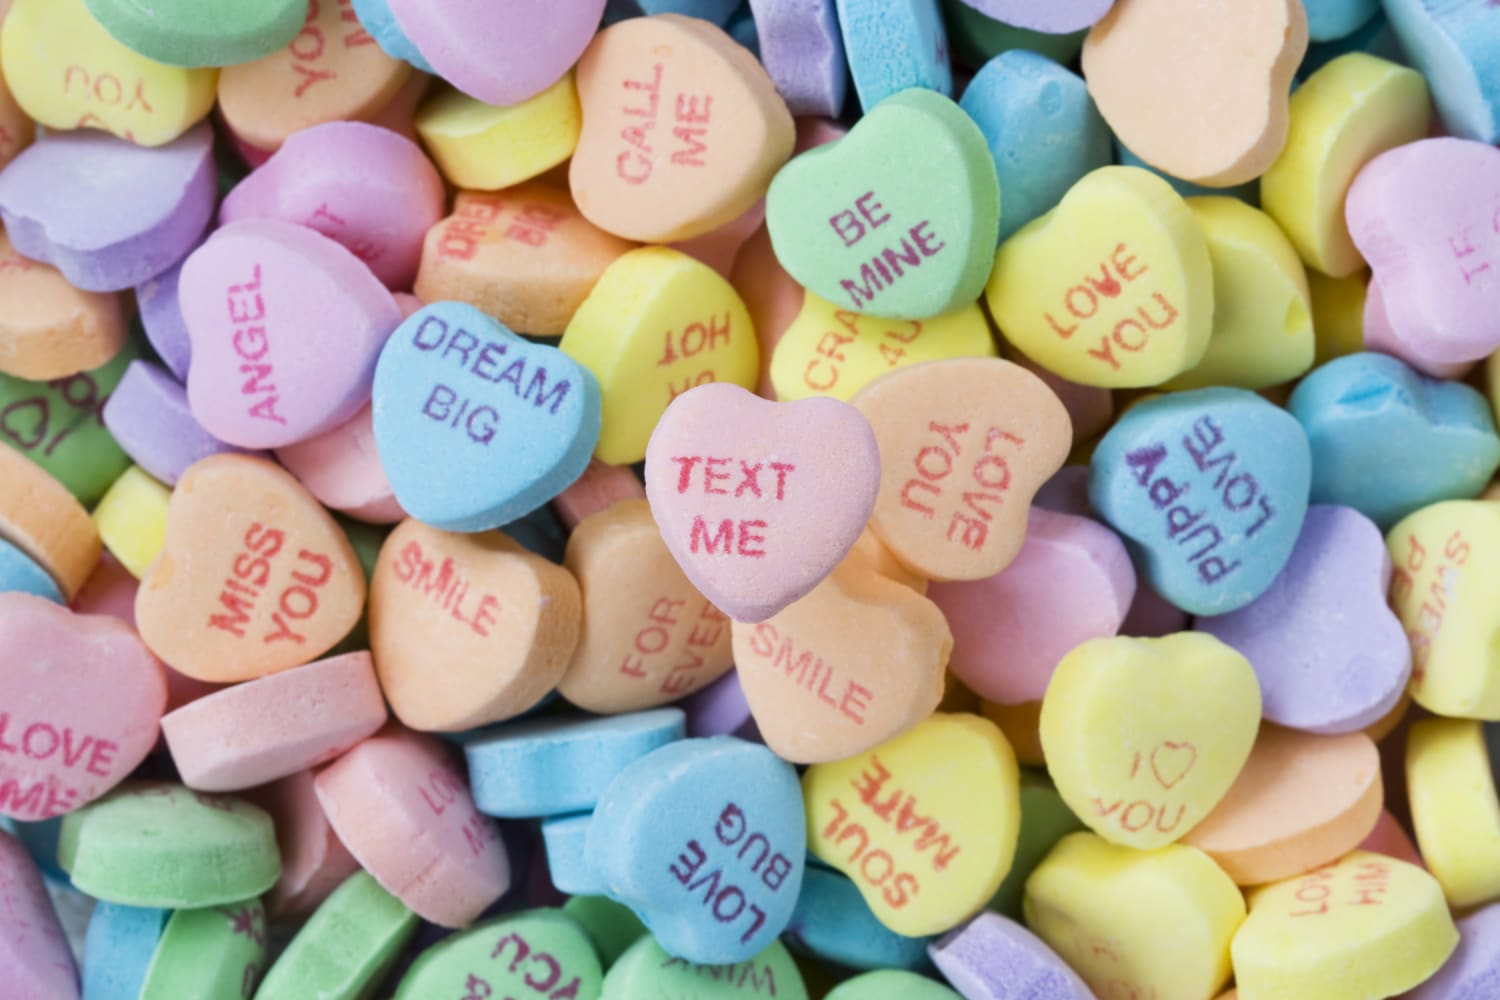 So long, Sweethearts: Candy hearts not available for Valentine's Day